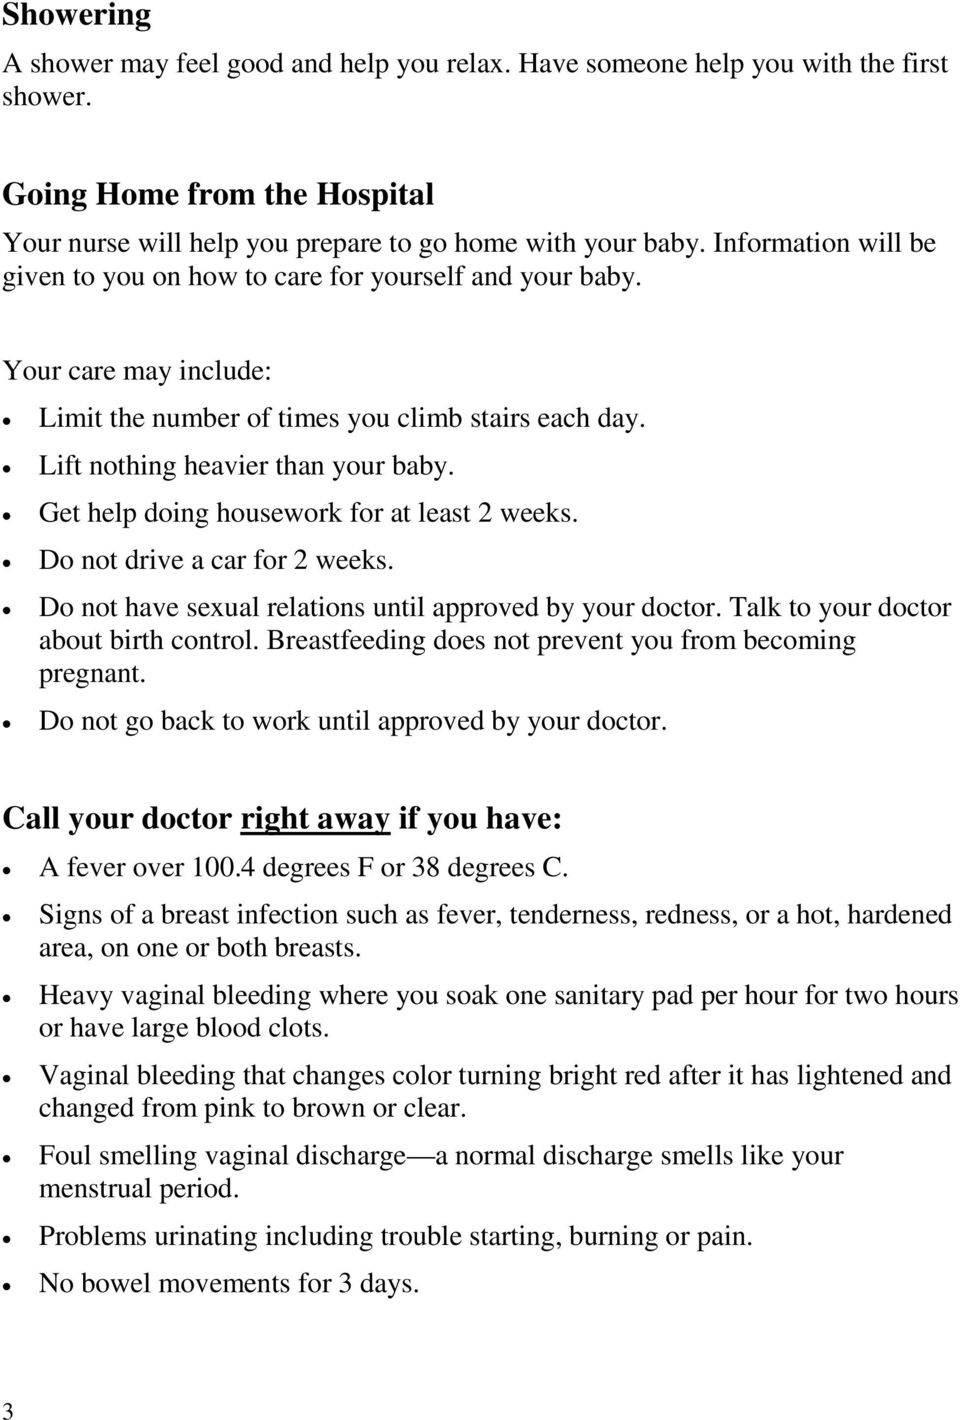 Get help doing housework for at least 2 weeks. Do not drive a car for 2 weeks. Do not have sexual relations until approved by your doctor. Talk to your doctor about birth control.